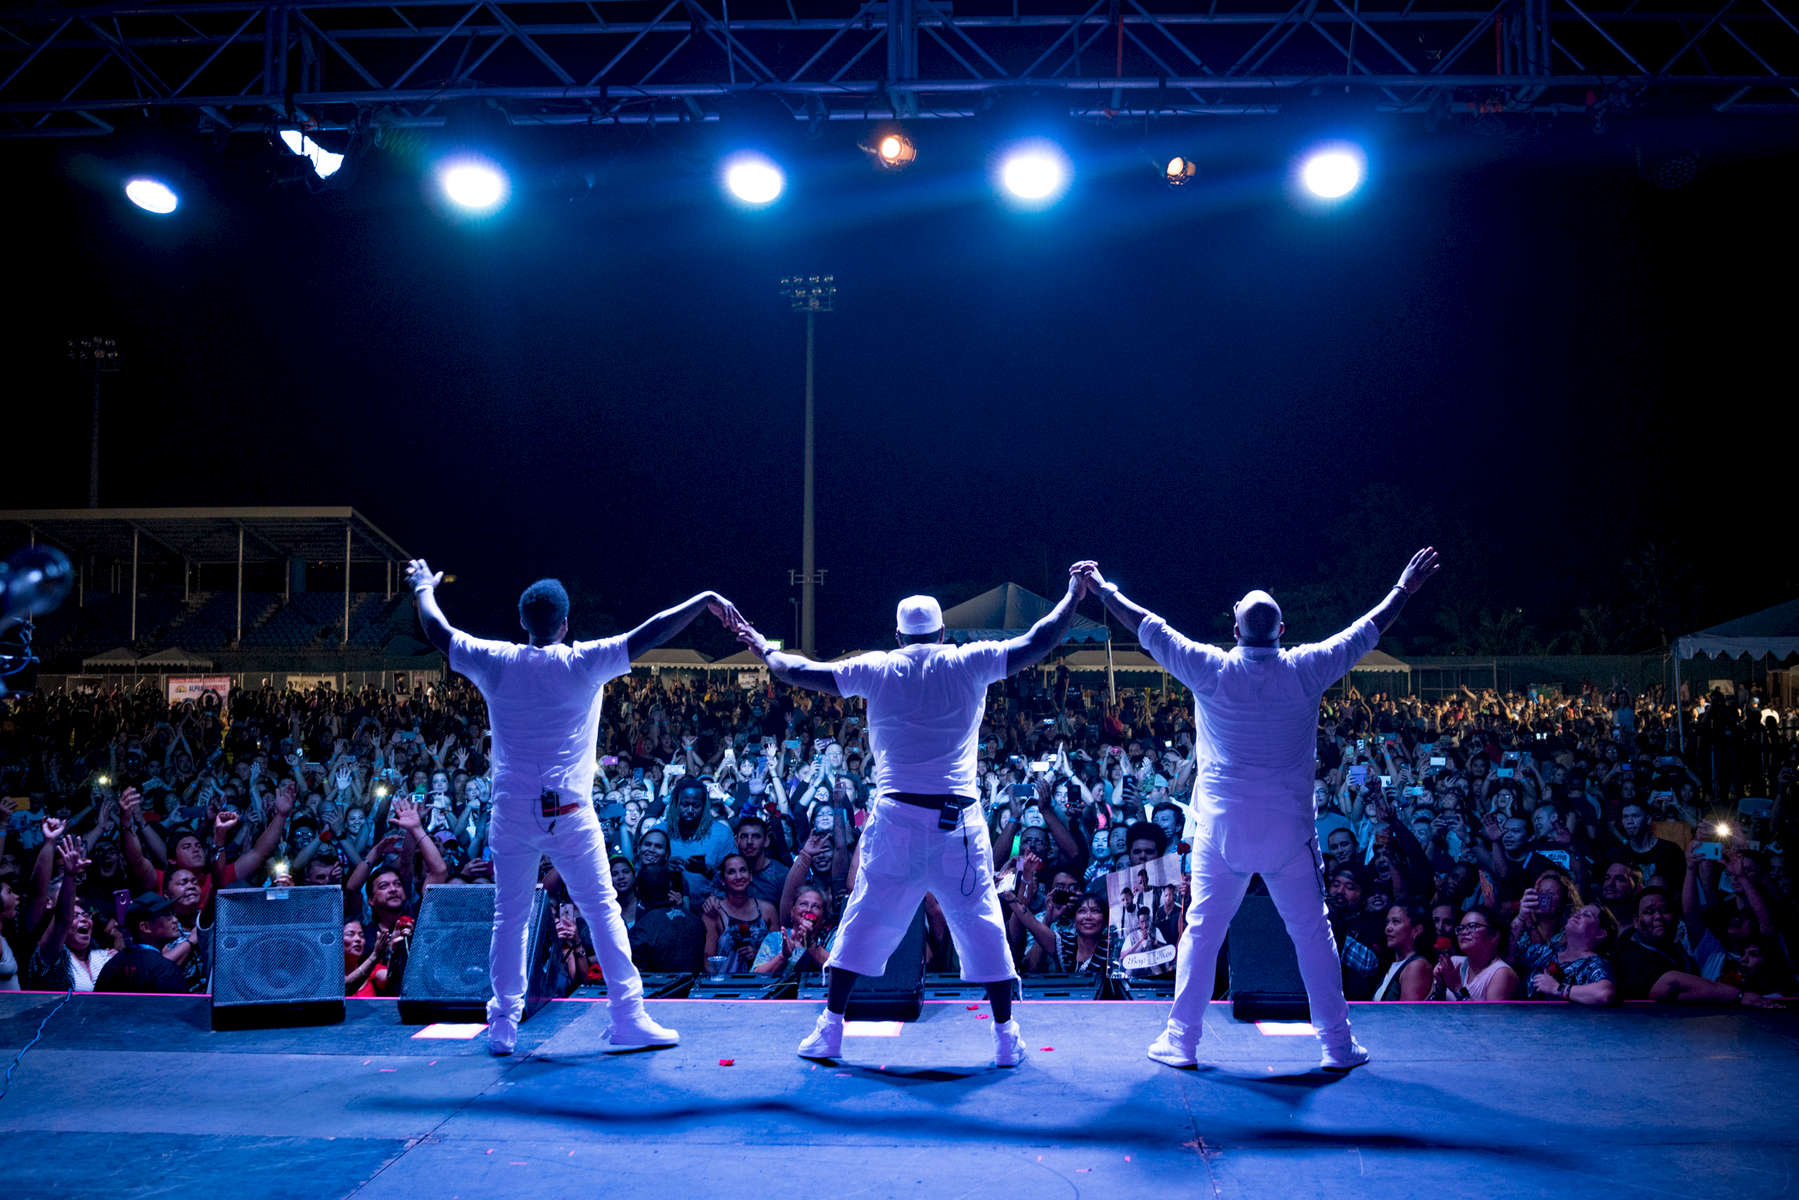 With an audience of over 3000 cheering fans, the Boyz II Men did not disappoint, performing their classic hits during a show at the Paseo Stadium in Hagatna, Guam. (Dec. 15, 2017)Photo by Nancy Borowick